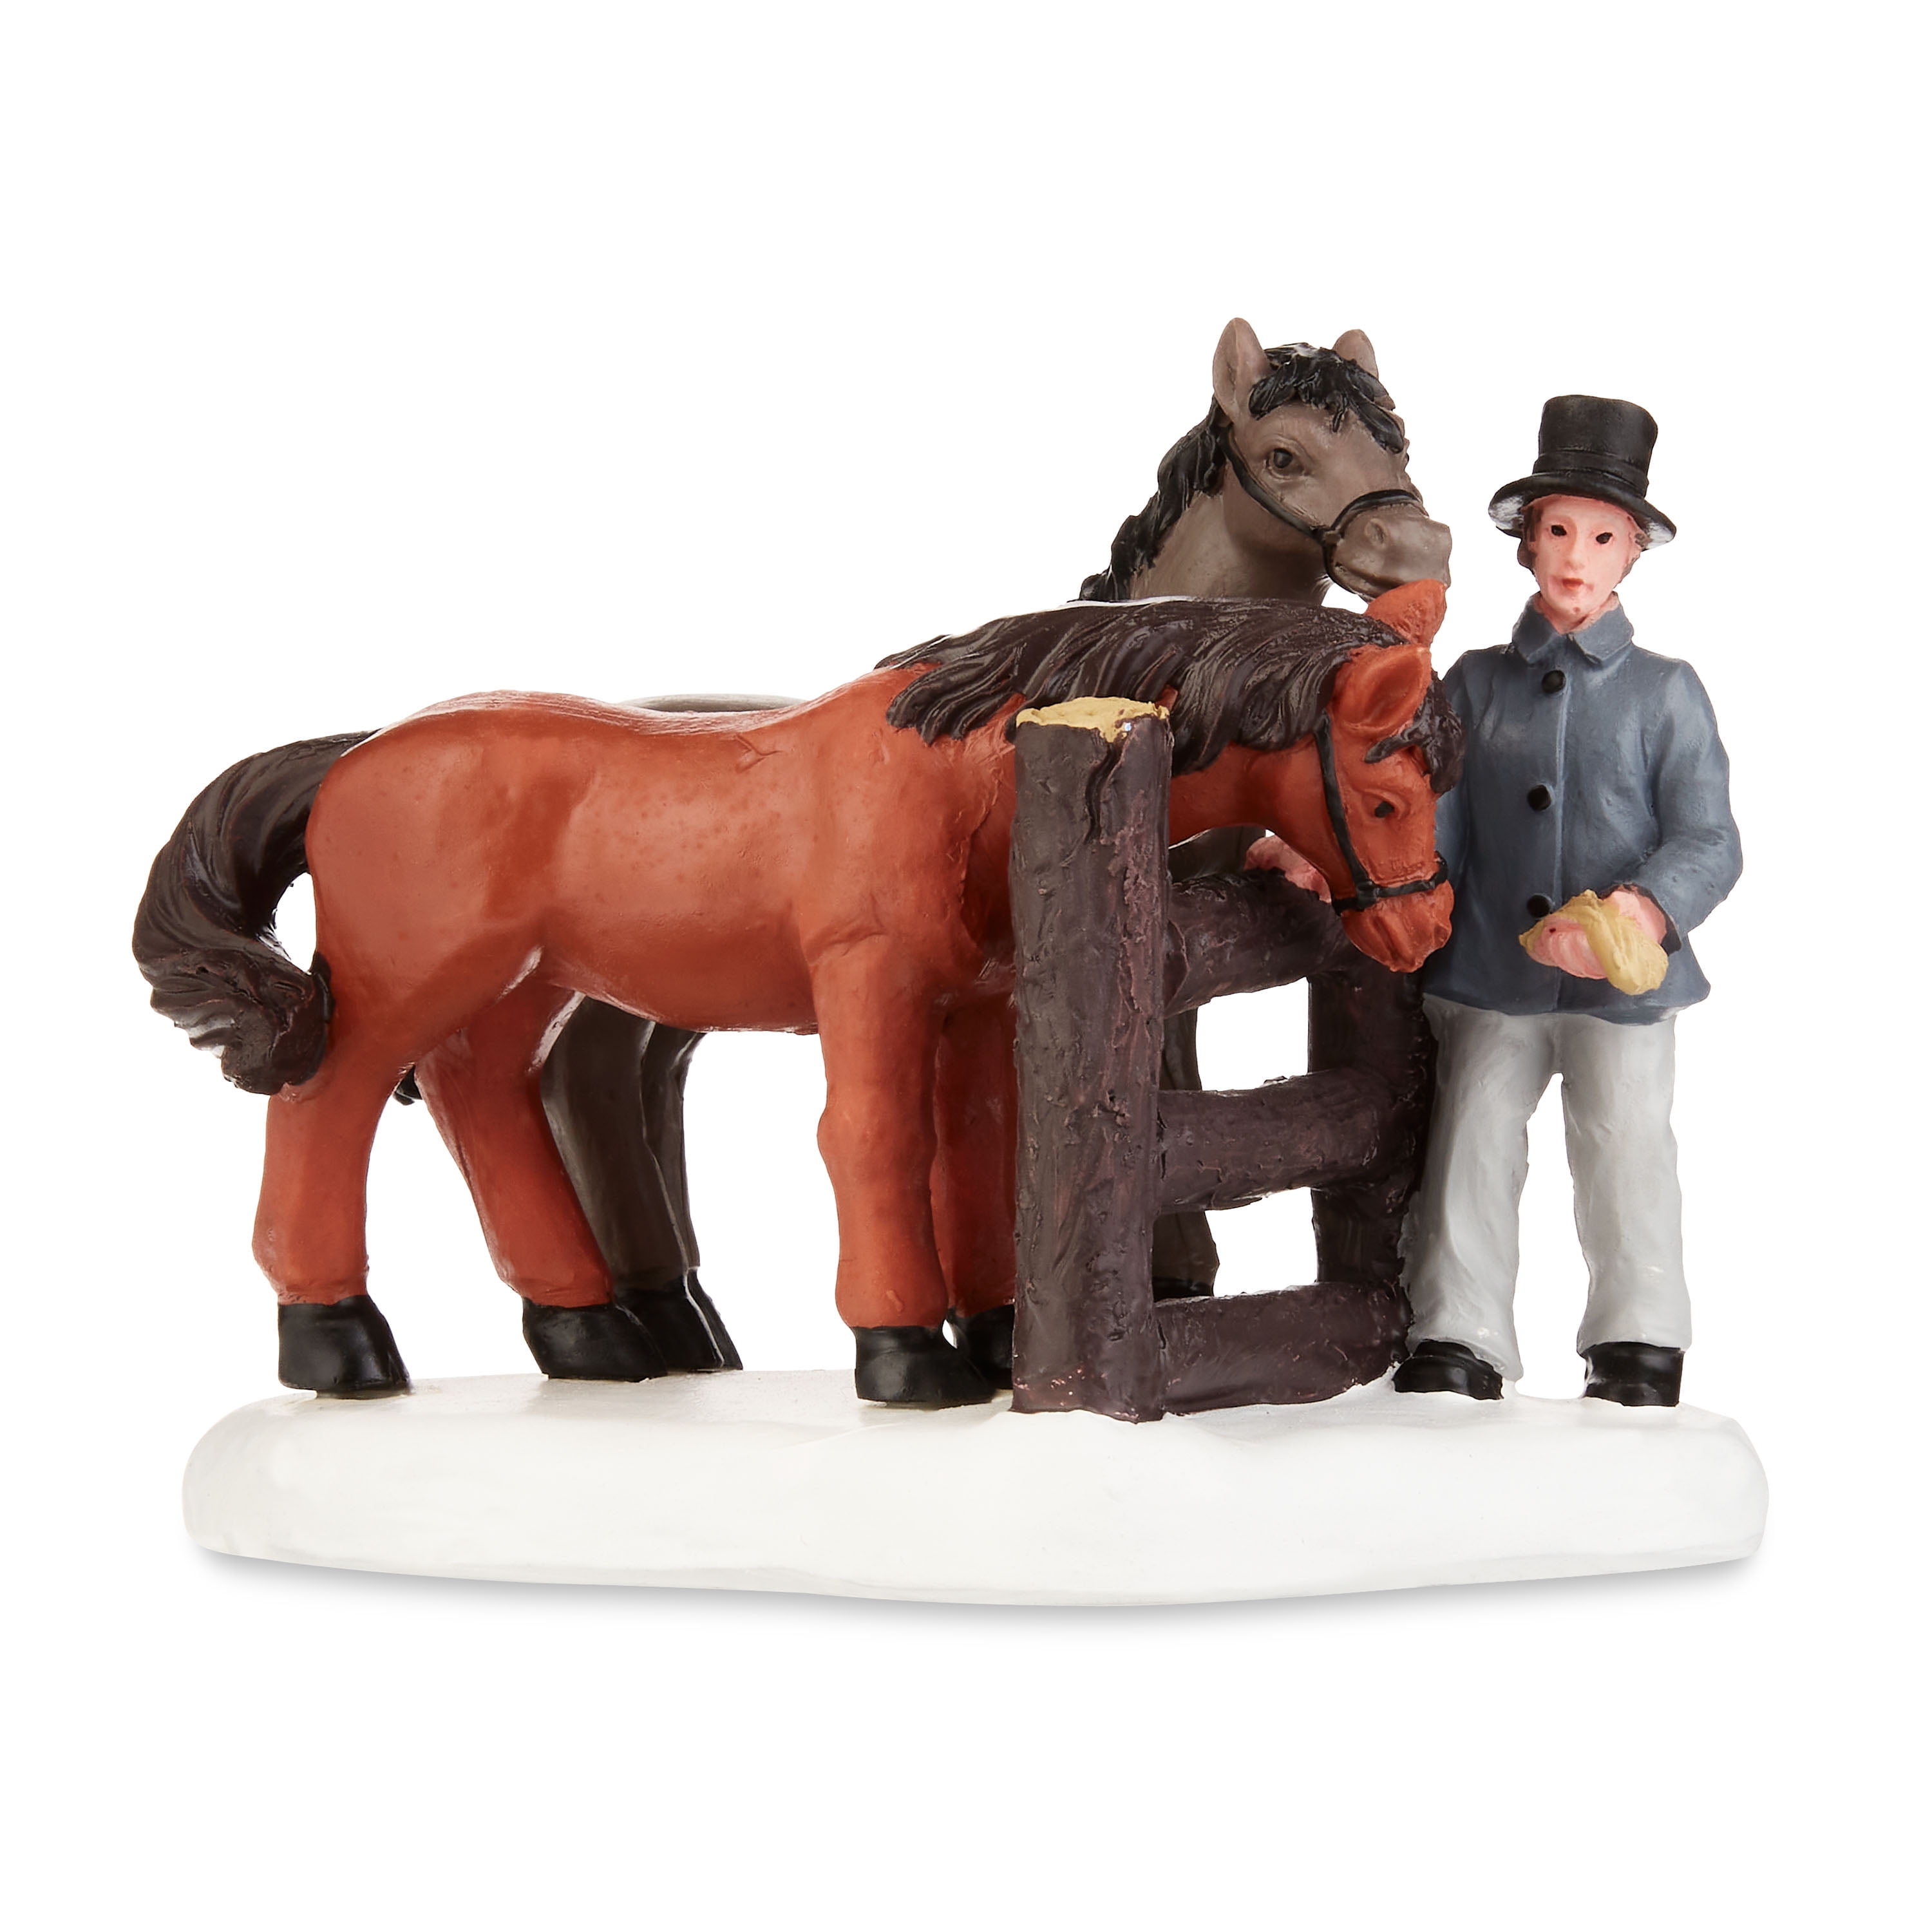 Holiday Time Christmas Indoor Decoration Multi-Color Visiting The Horses Village Figurine, 3.75" X 2.125" X 3"H